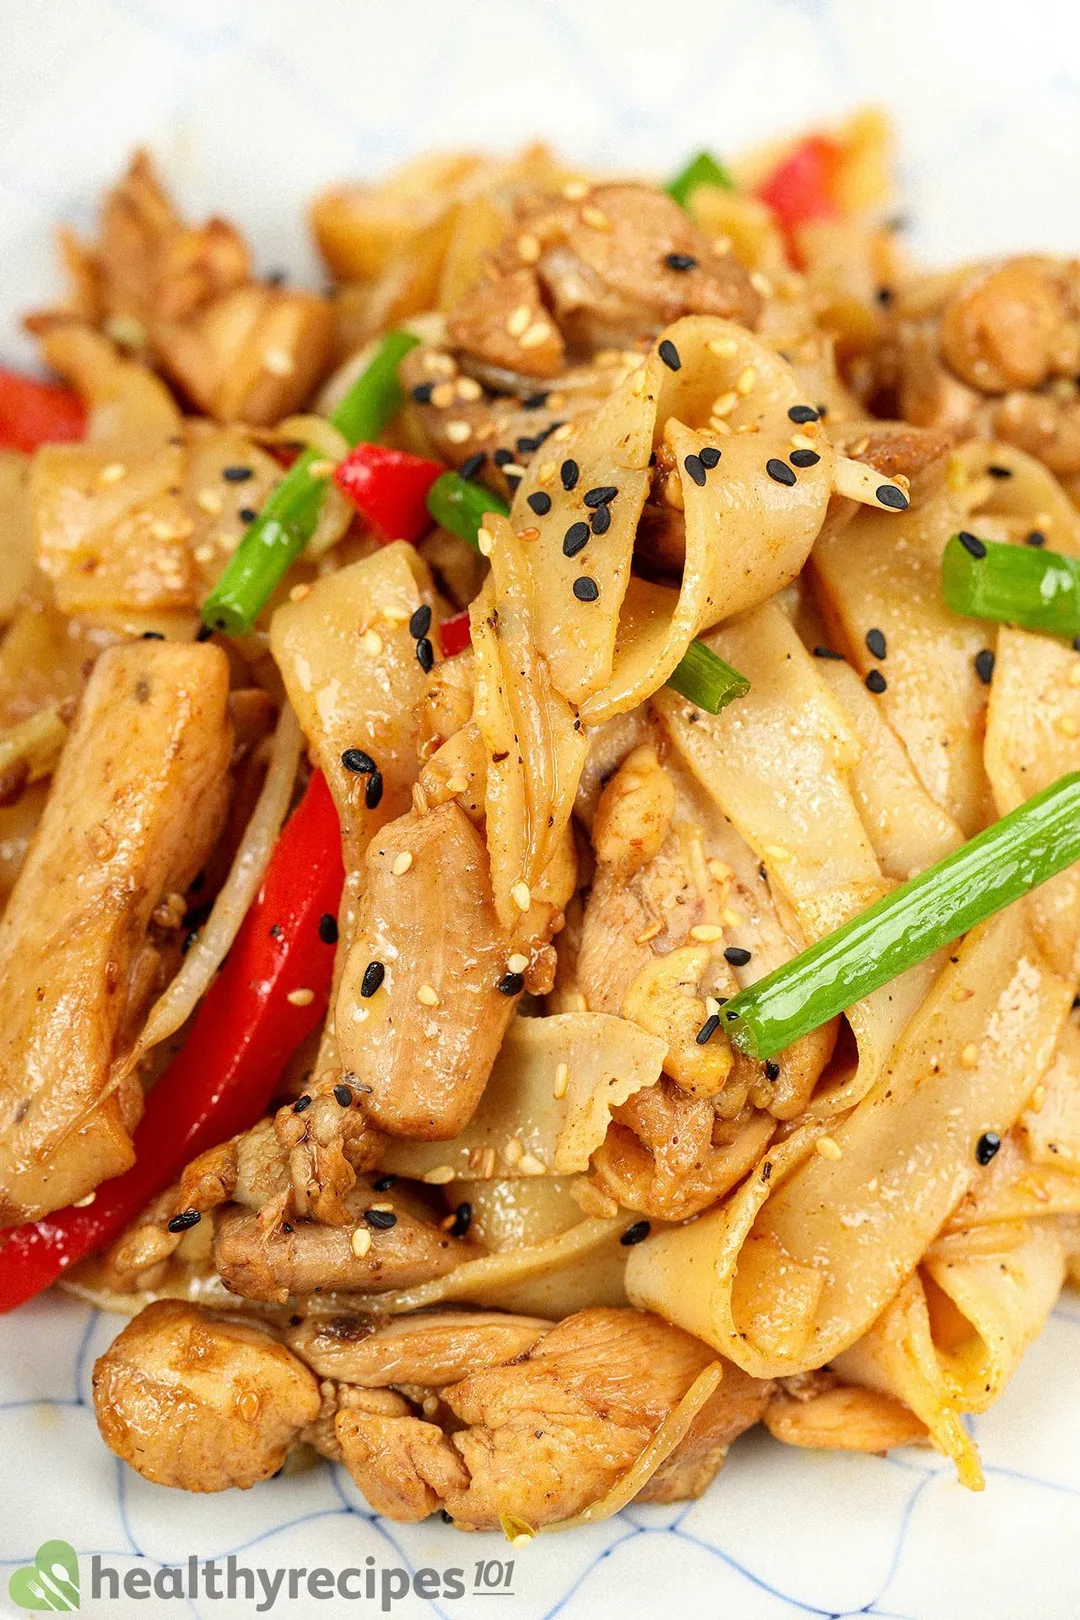 A close-up shot of a plate of chicken chow fun